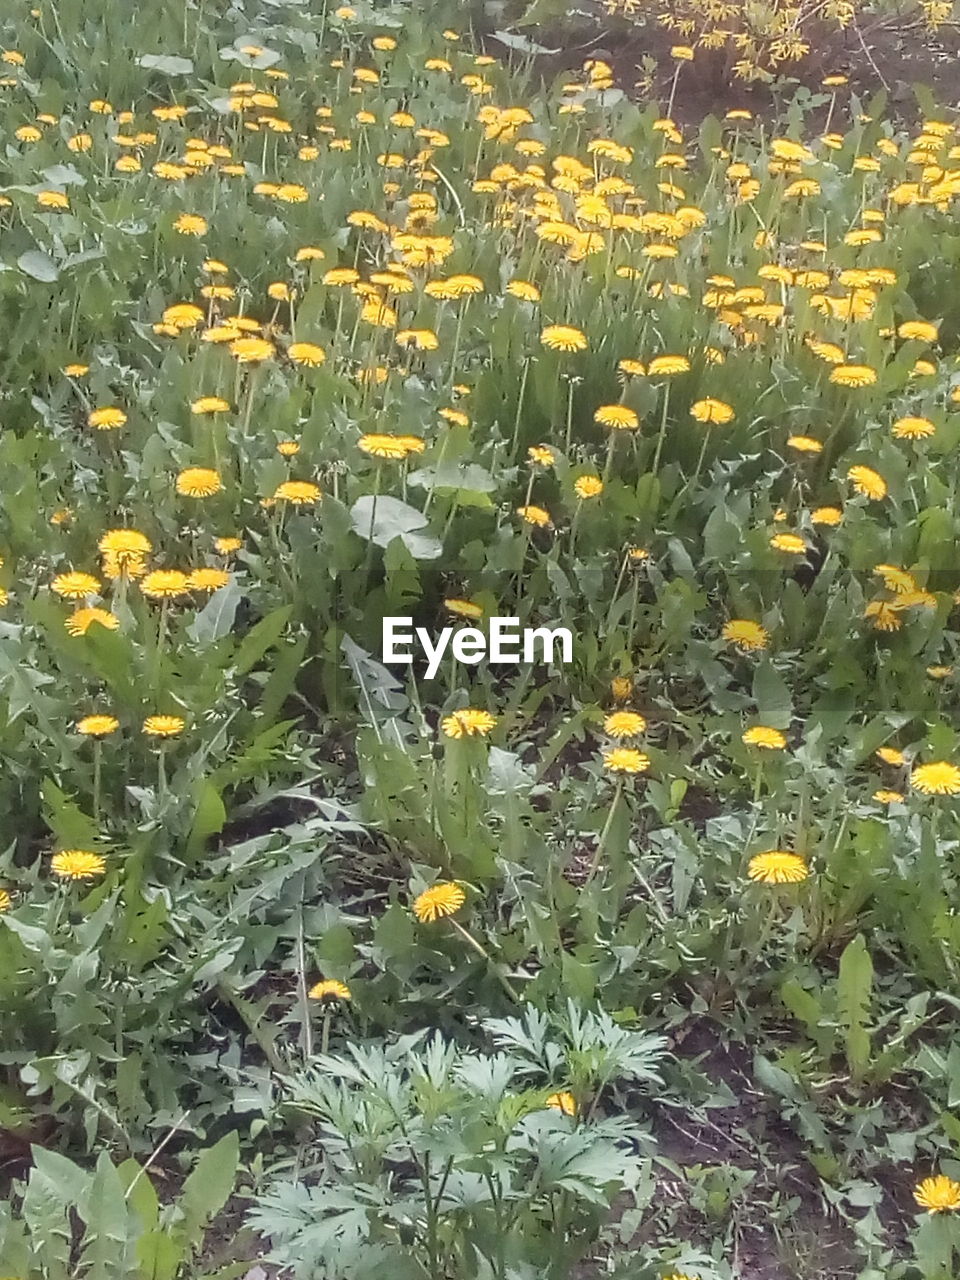 YELLOW FLOWERS BLOOMING IN PARK